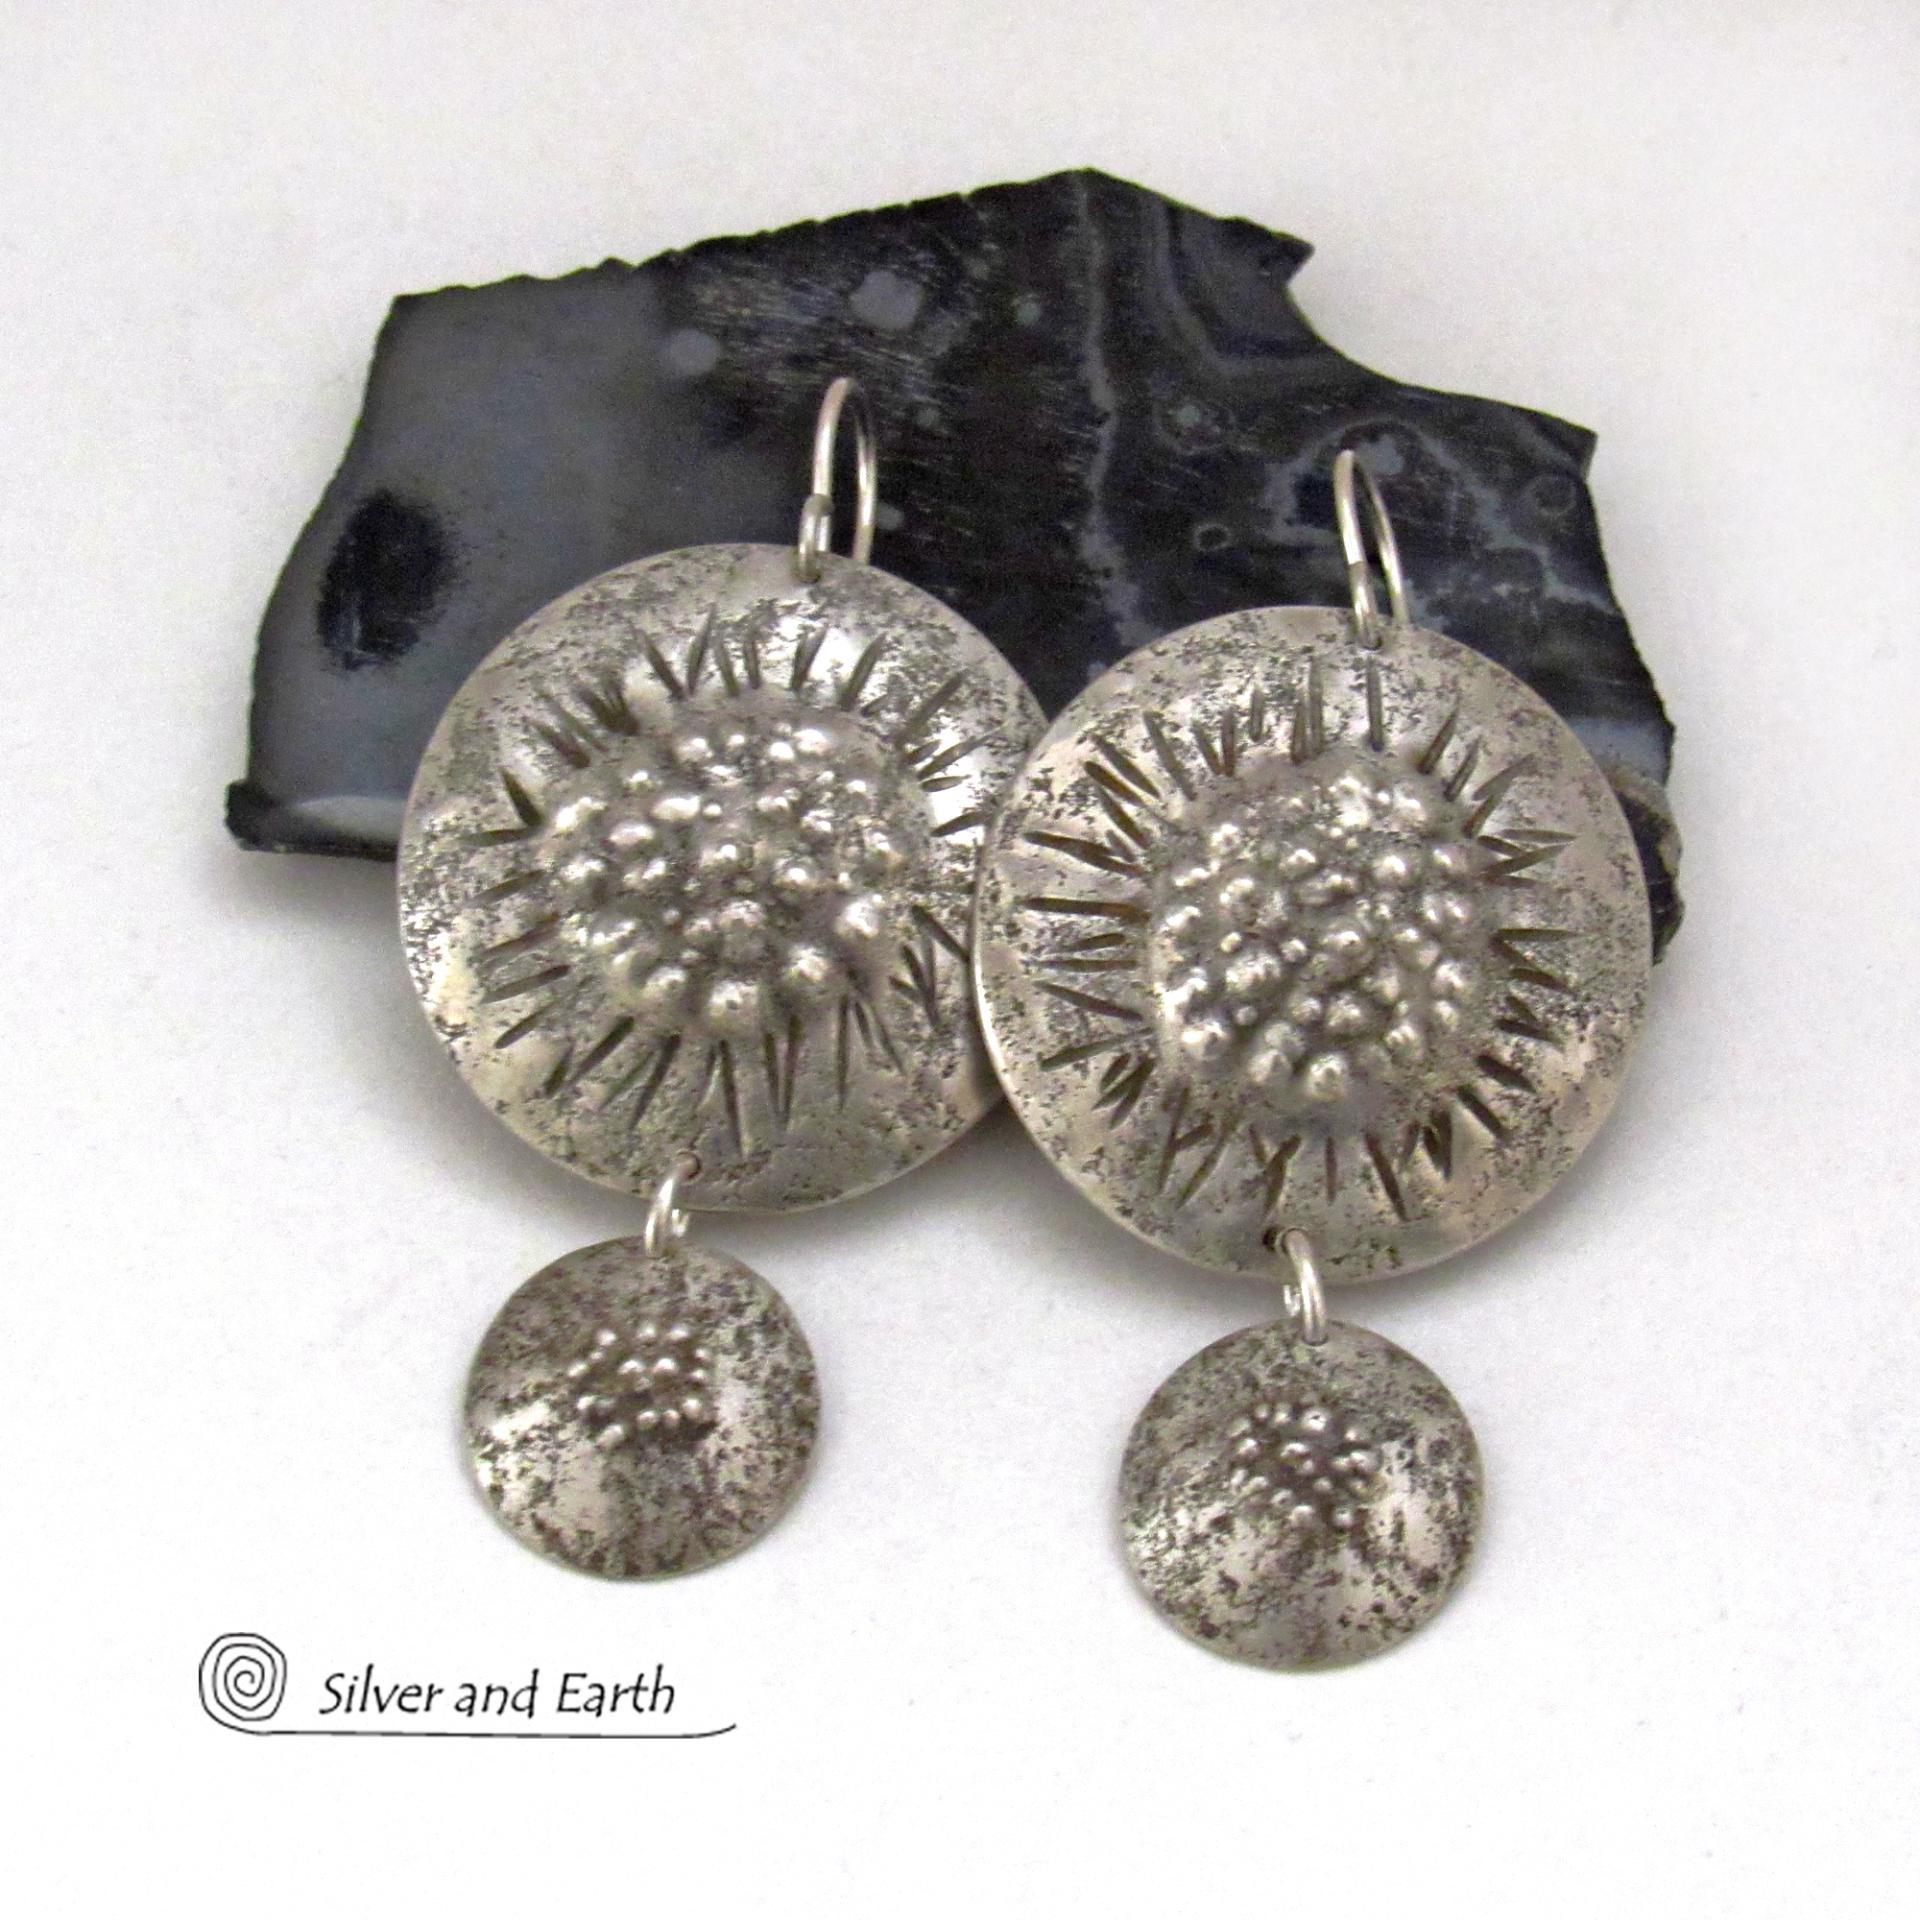 Big Round Sterling Silver Double Dangle Earrings with Rustic Organic Texture